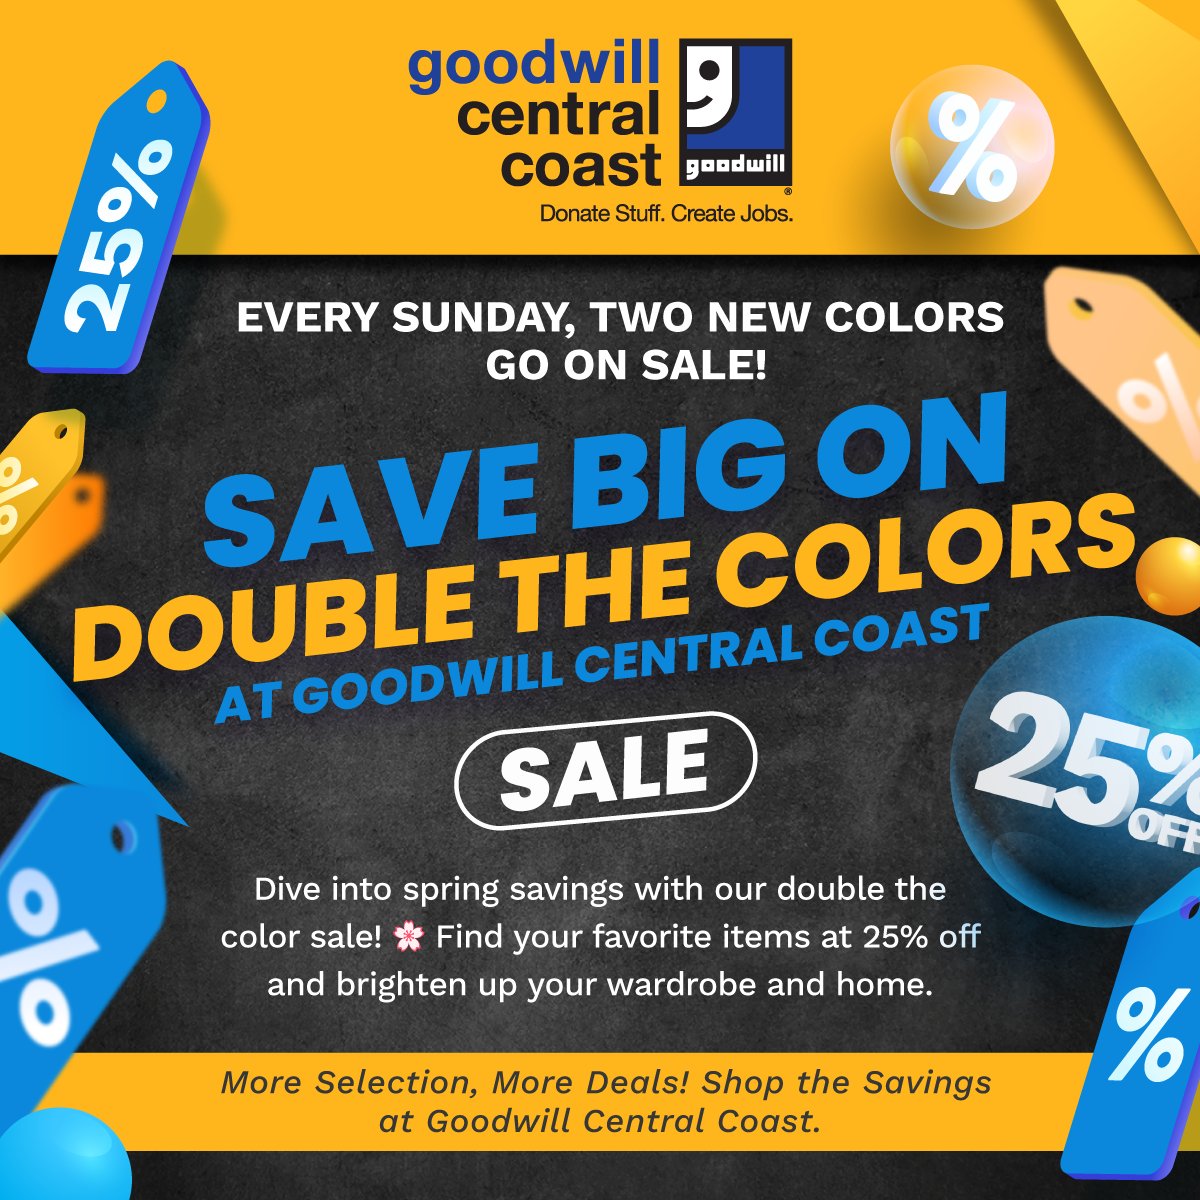 Save Big Sale! Every Sunday, two new colors go on sale!

Dive into spring savings with our double the color sale-find your favorite items at 25% off and brighten up your wardrobe and home. #GoodwillCentralCoast #ShopforGood #StartatGoodwillCC